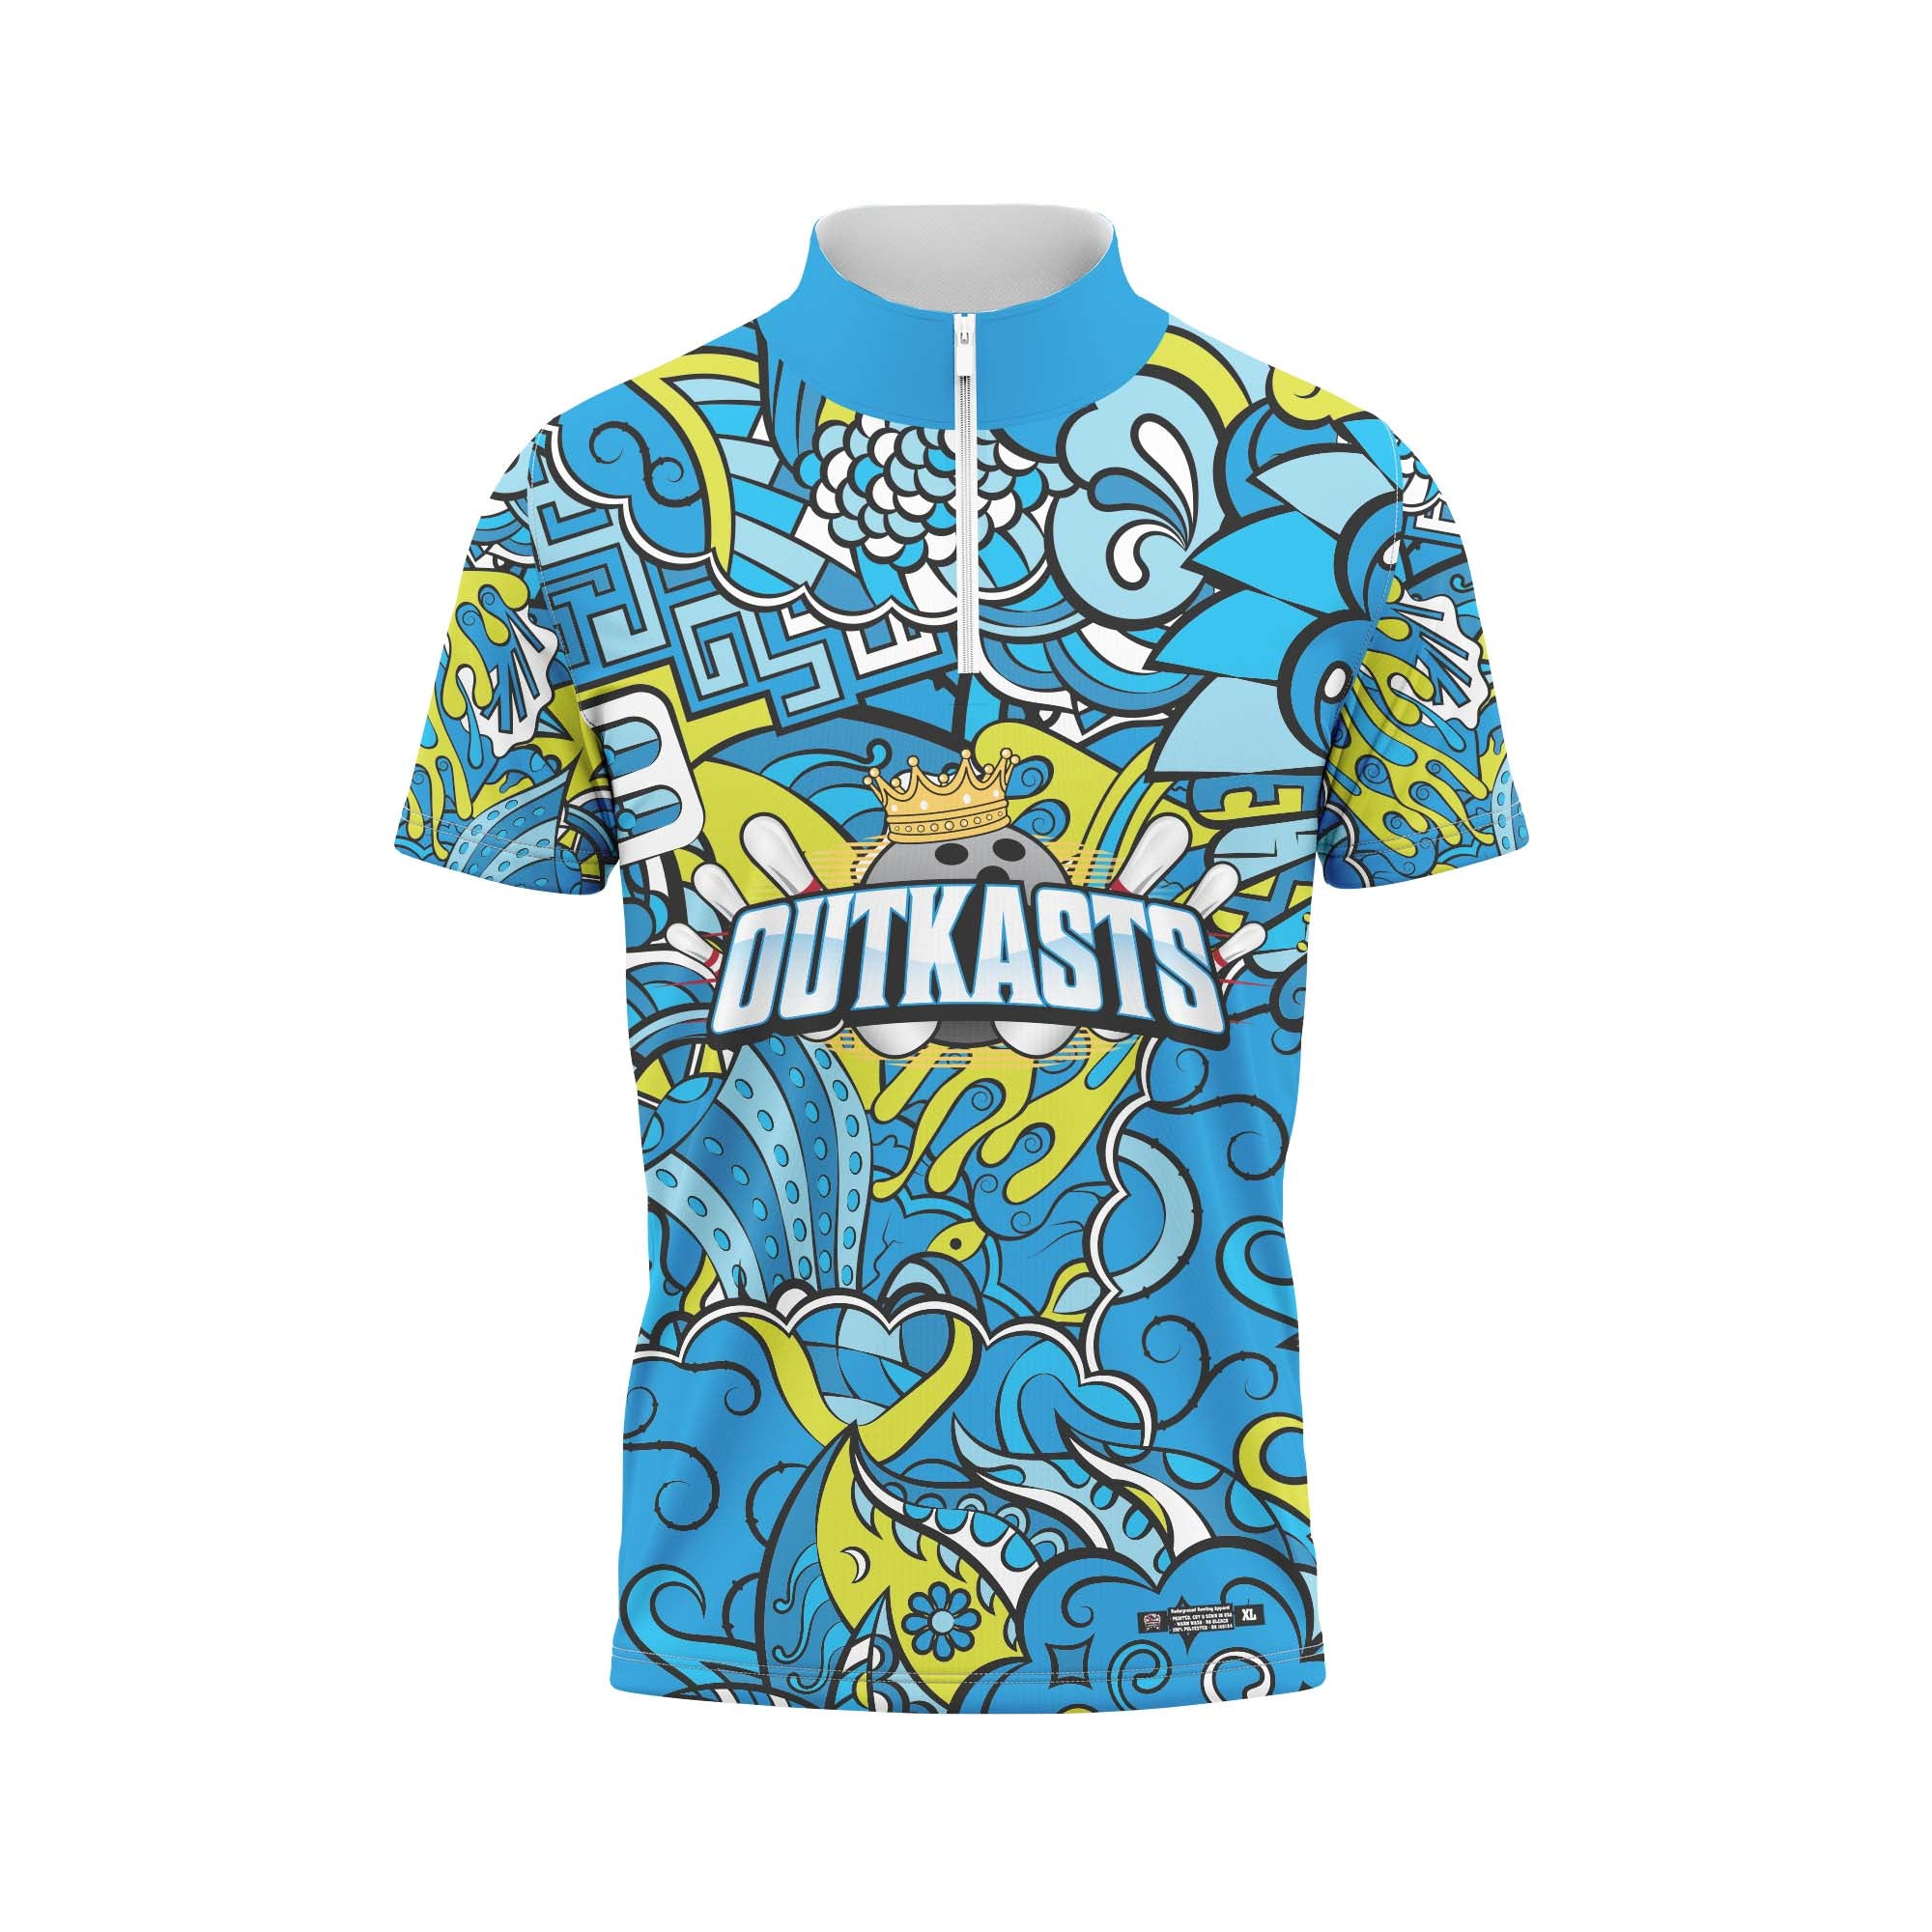 Outkasts Doodle Jersey